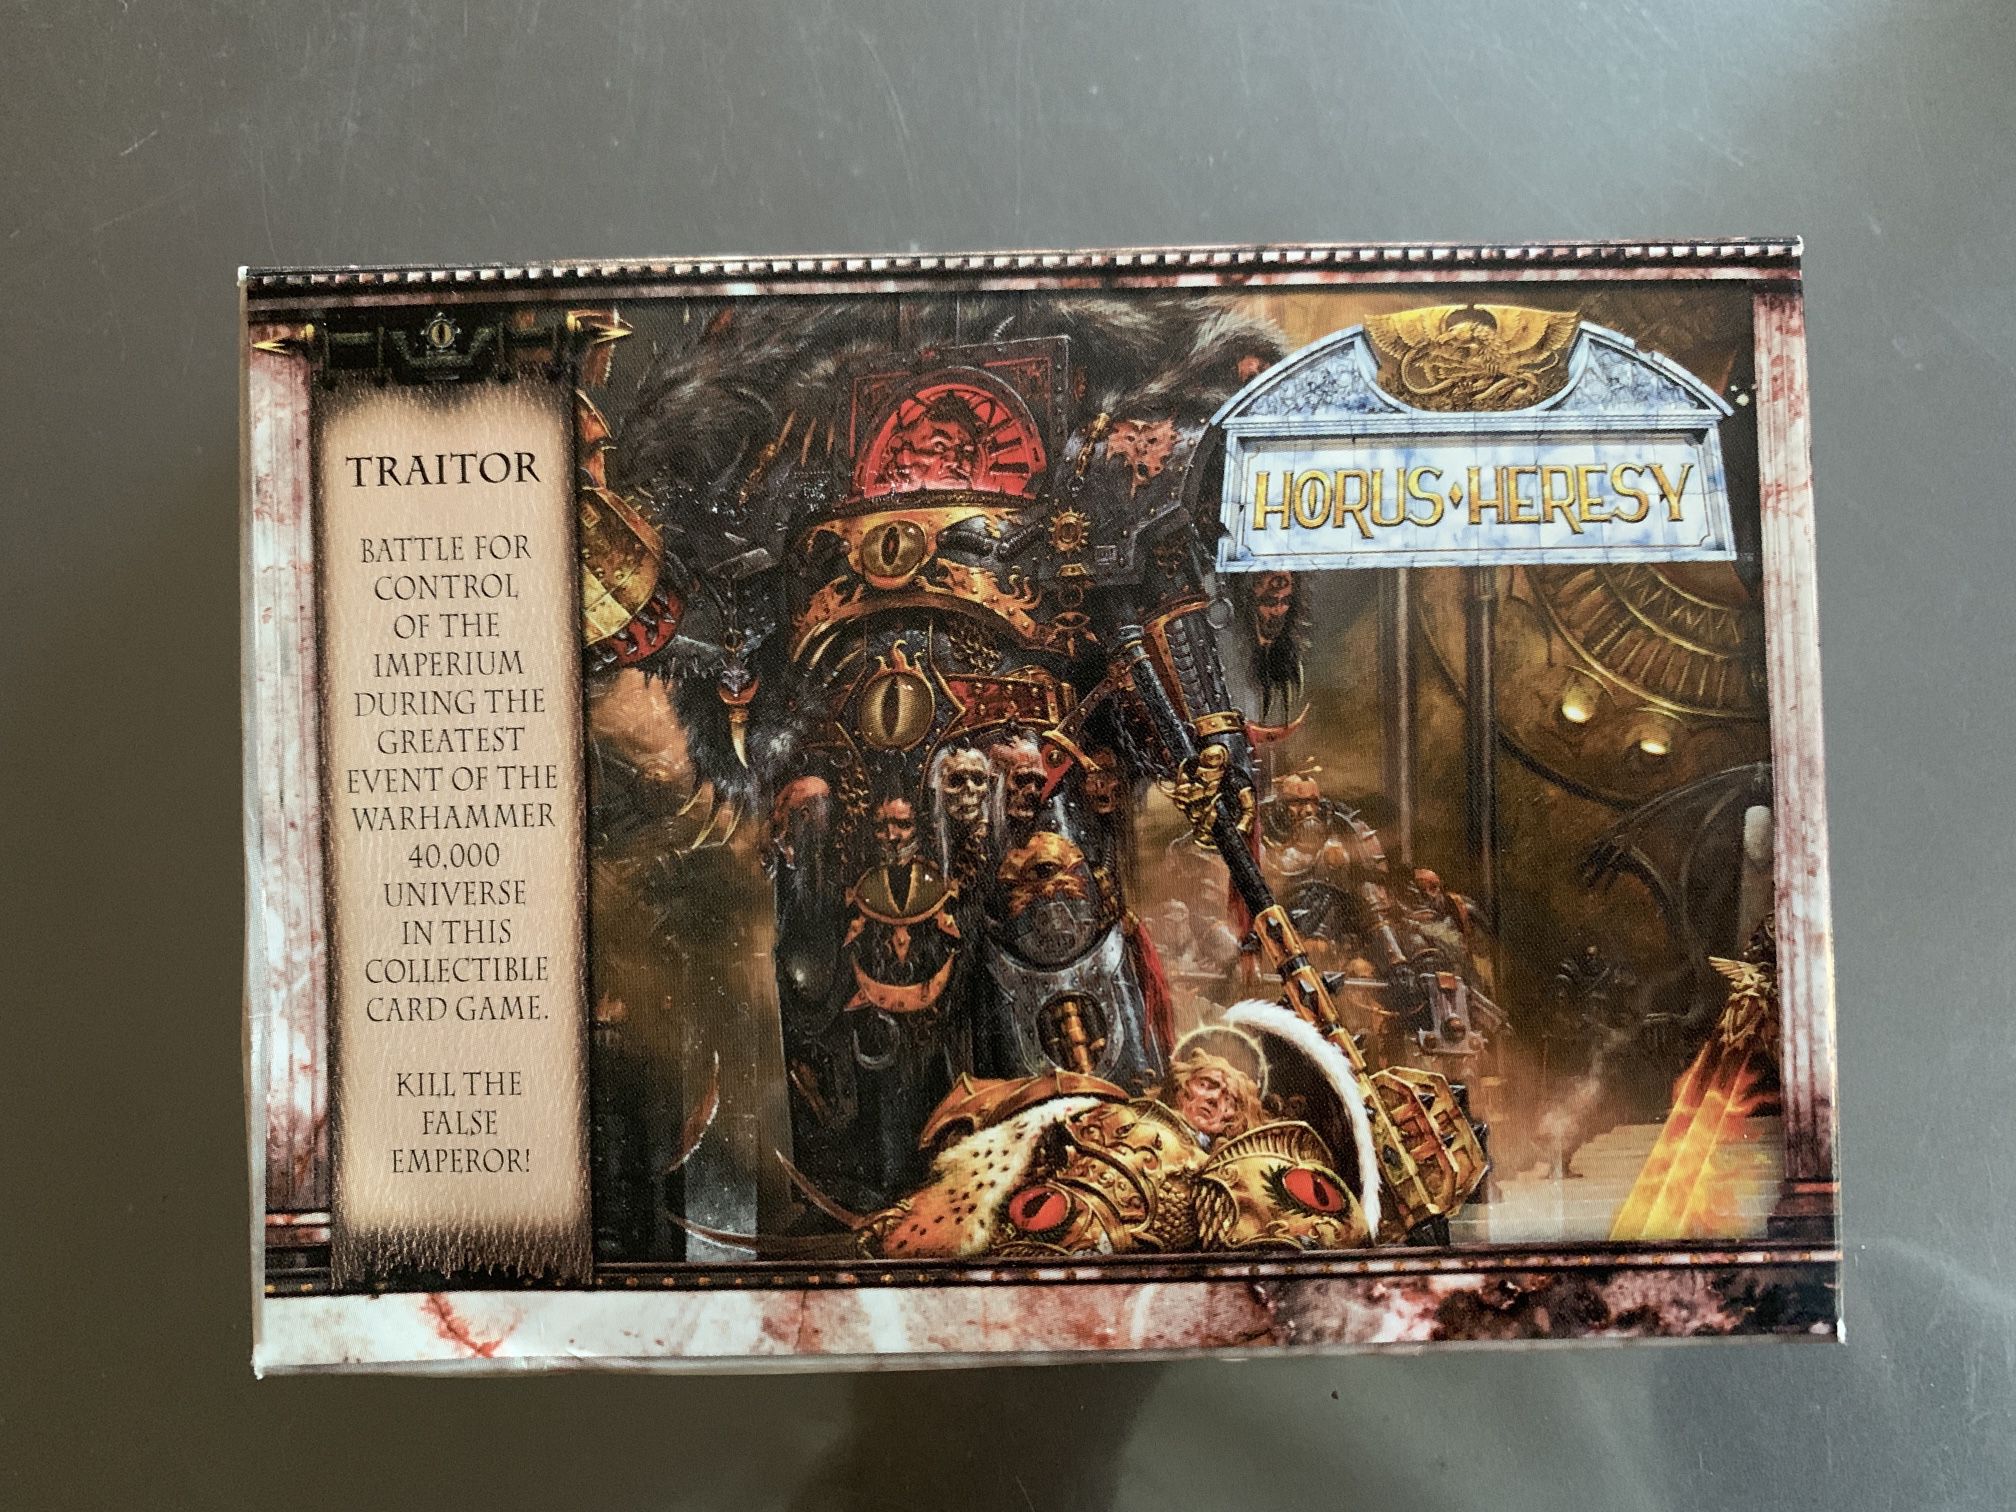 Sabertooth Game Horus Heresy CCG OOP Traitor's Card Game stg#5012-1 - Like New - Very rare